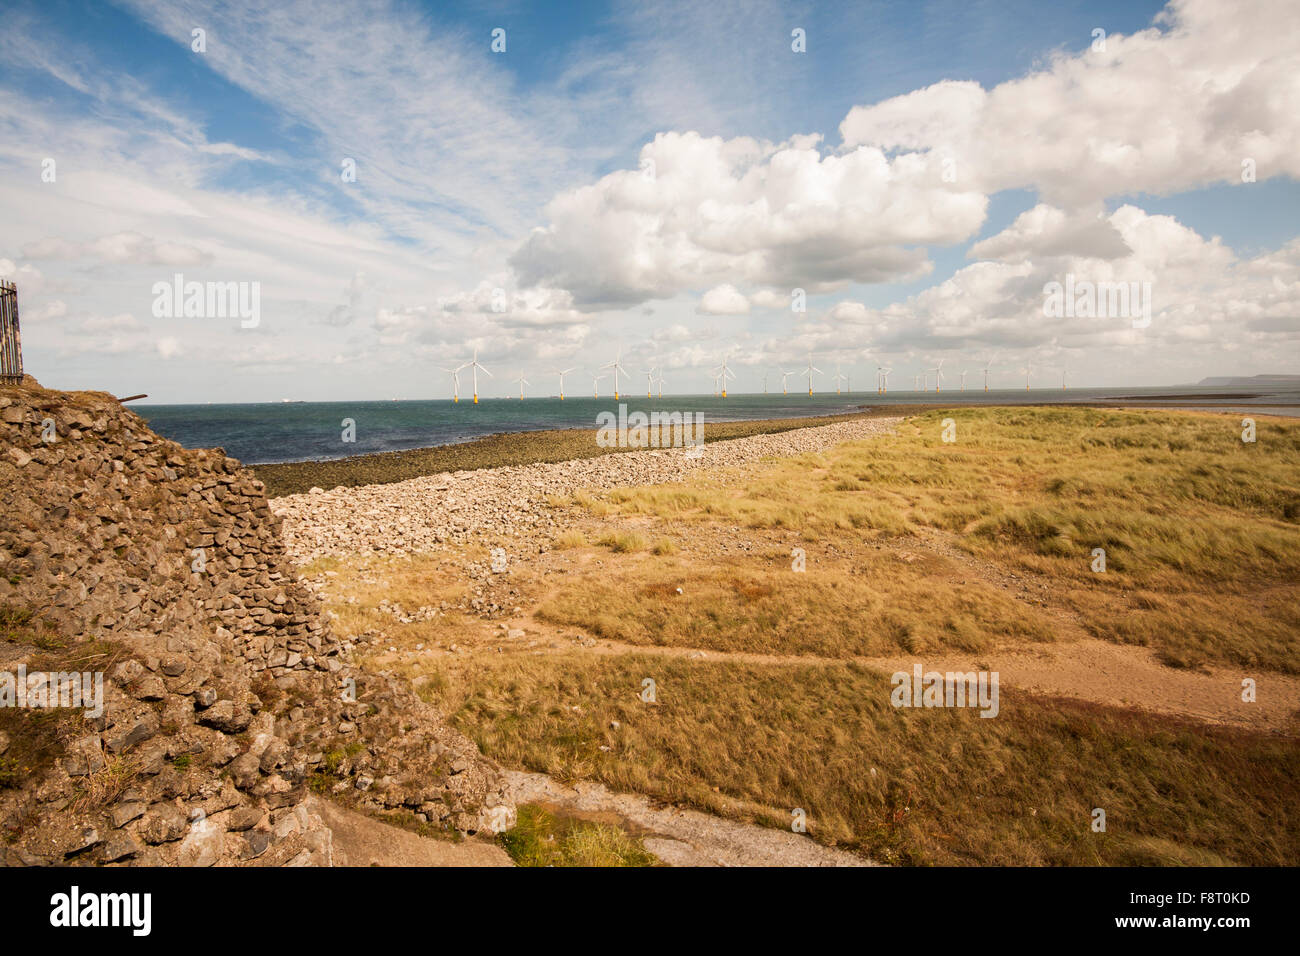 A view of the wind turbines off the east coast at Redcar showing rocky shoreline and blue cloudy skies Stock Photo